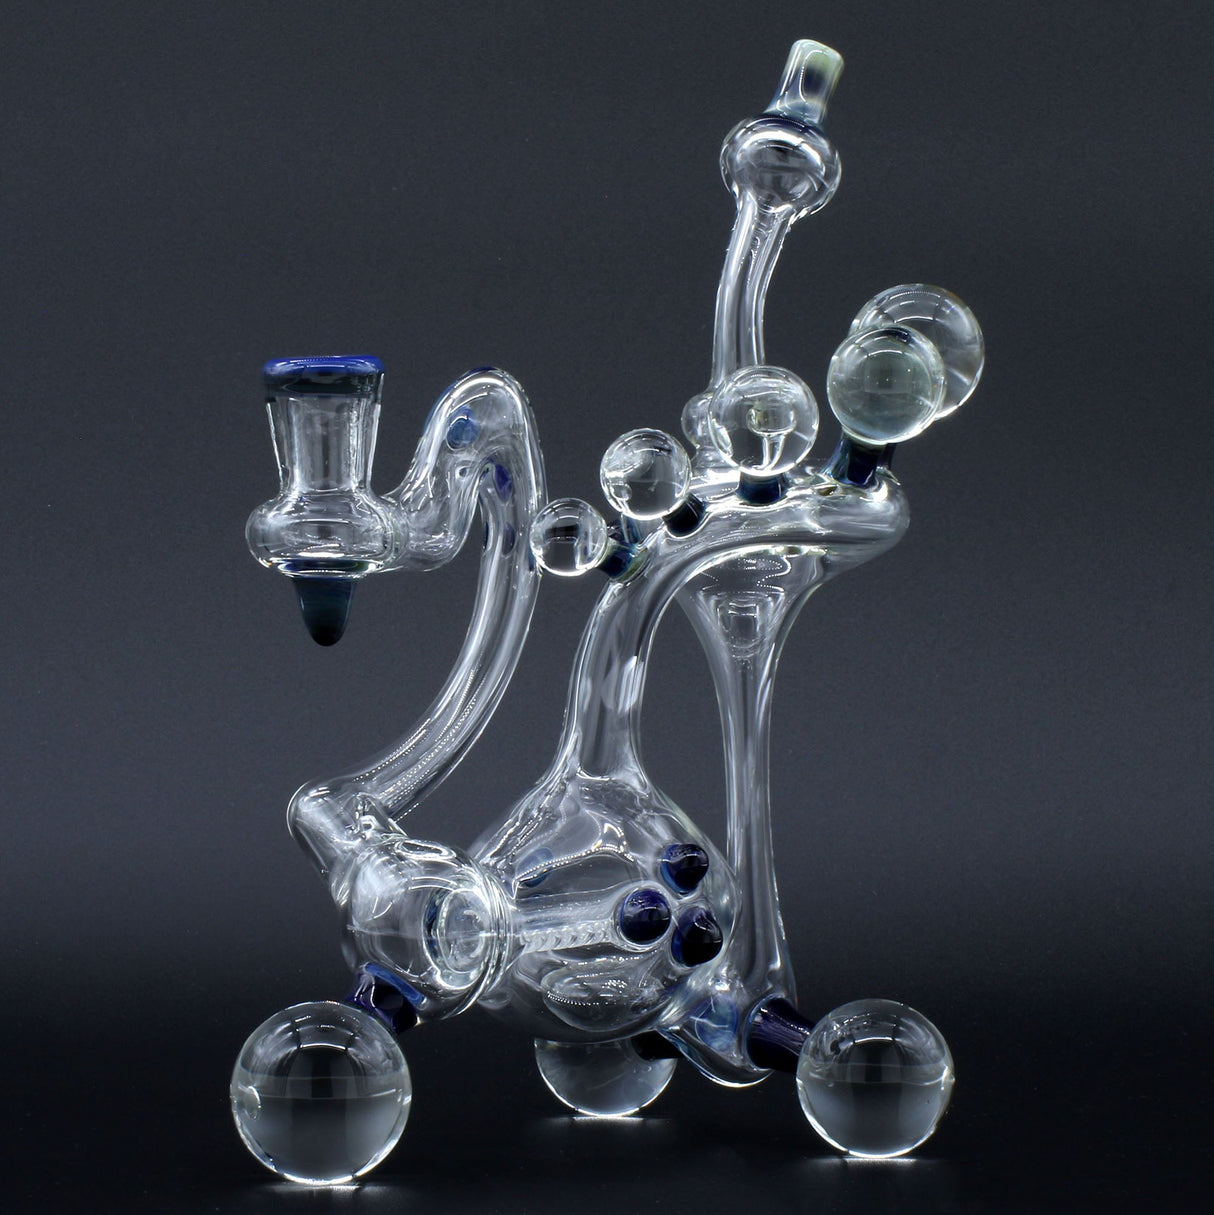 Clayball Glass "Milky Way" Heady Recycler Dab-Rig front view on seamless black background